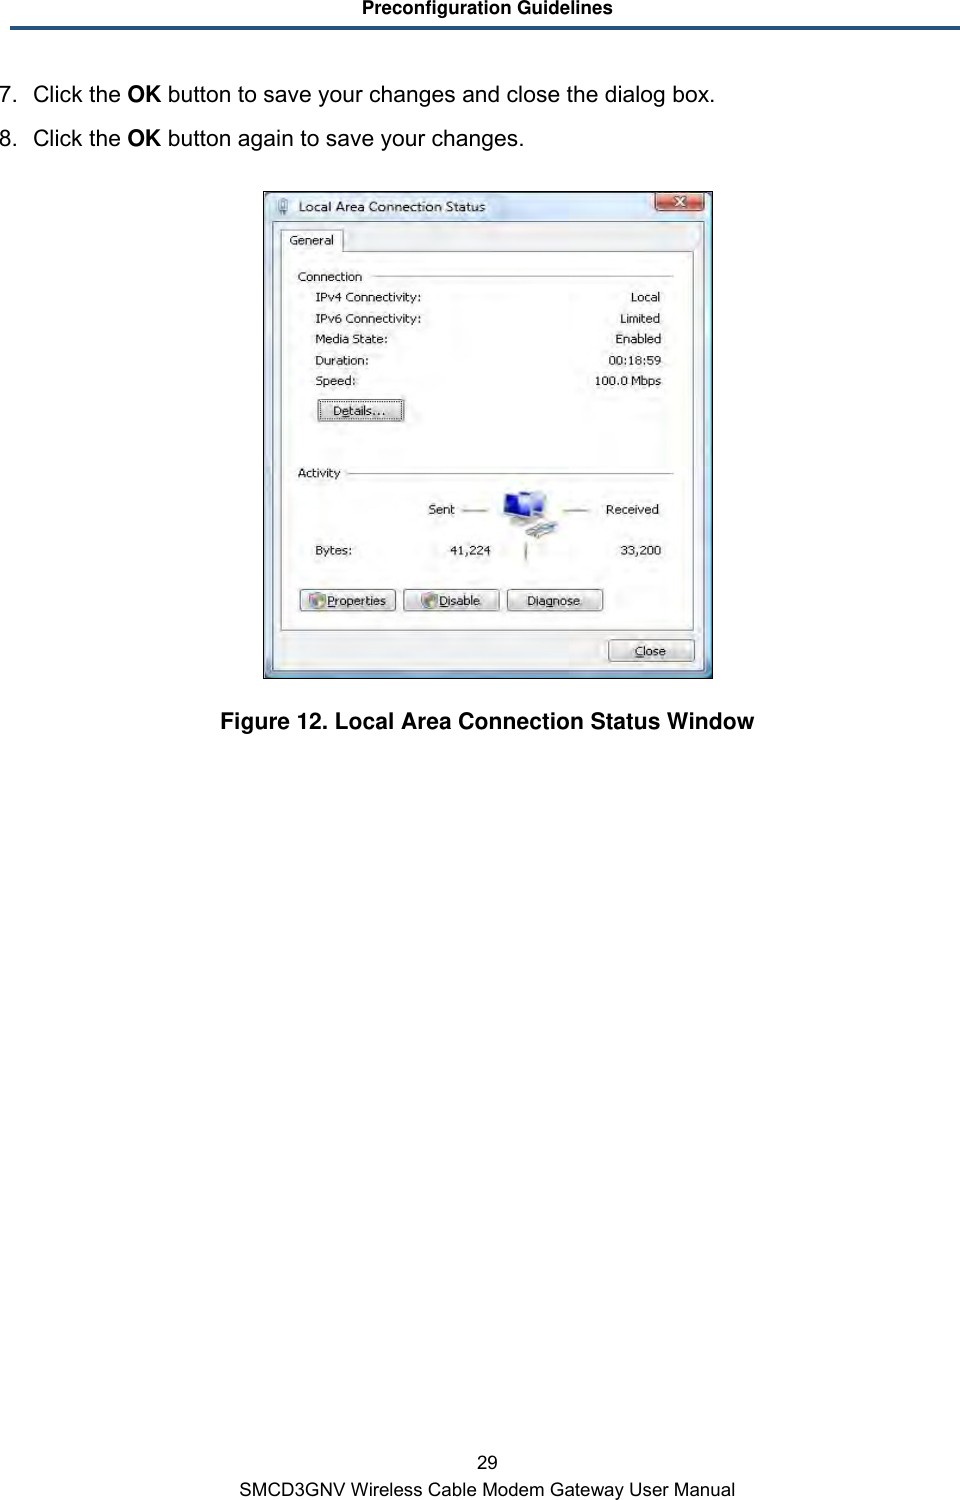 Preconfiguration Guidelines 29 SMCD3GNV Wireless Cable Modem Gateway User Manual 7. Click the OK button to save your changes and close the dialog box. 8. Click the OK button again to save your changes.  Figure 12. Local Area Connection Status Window 